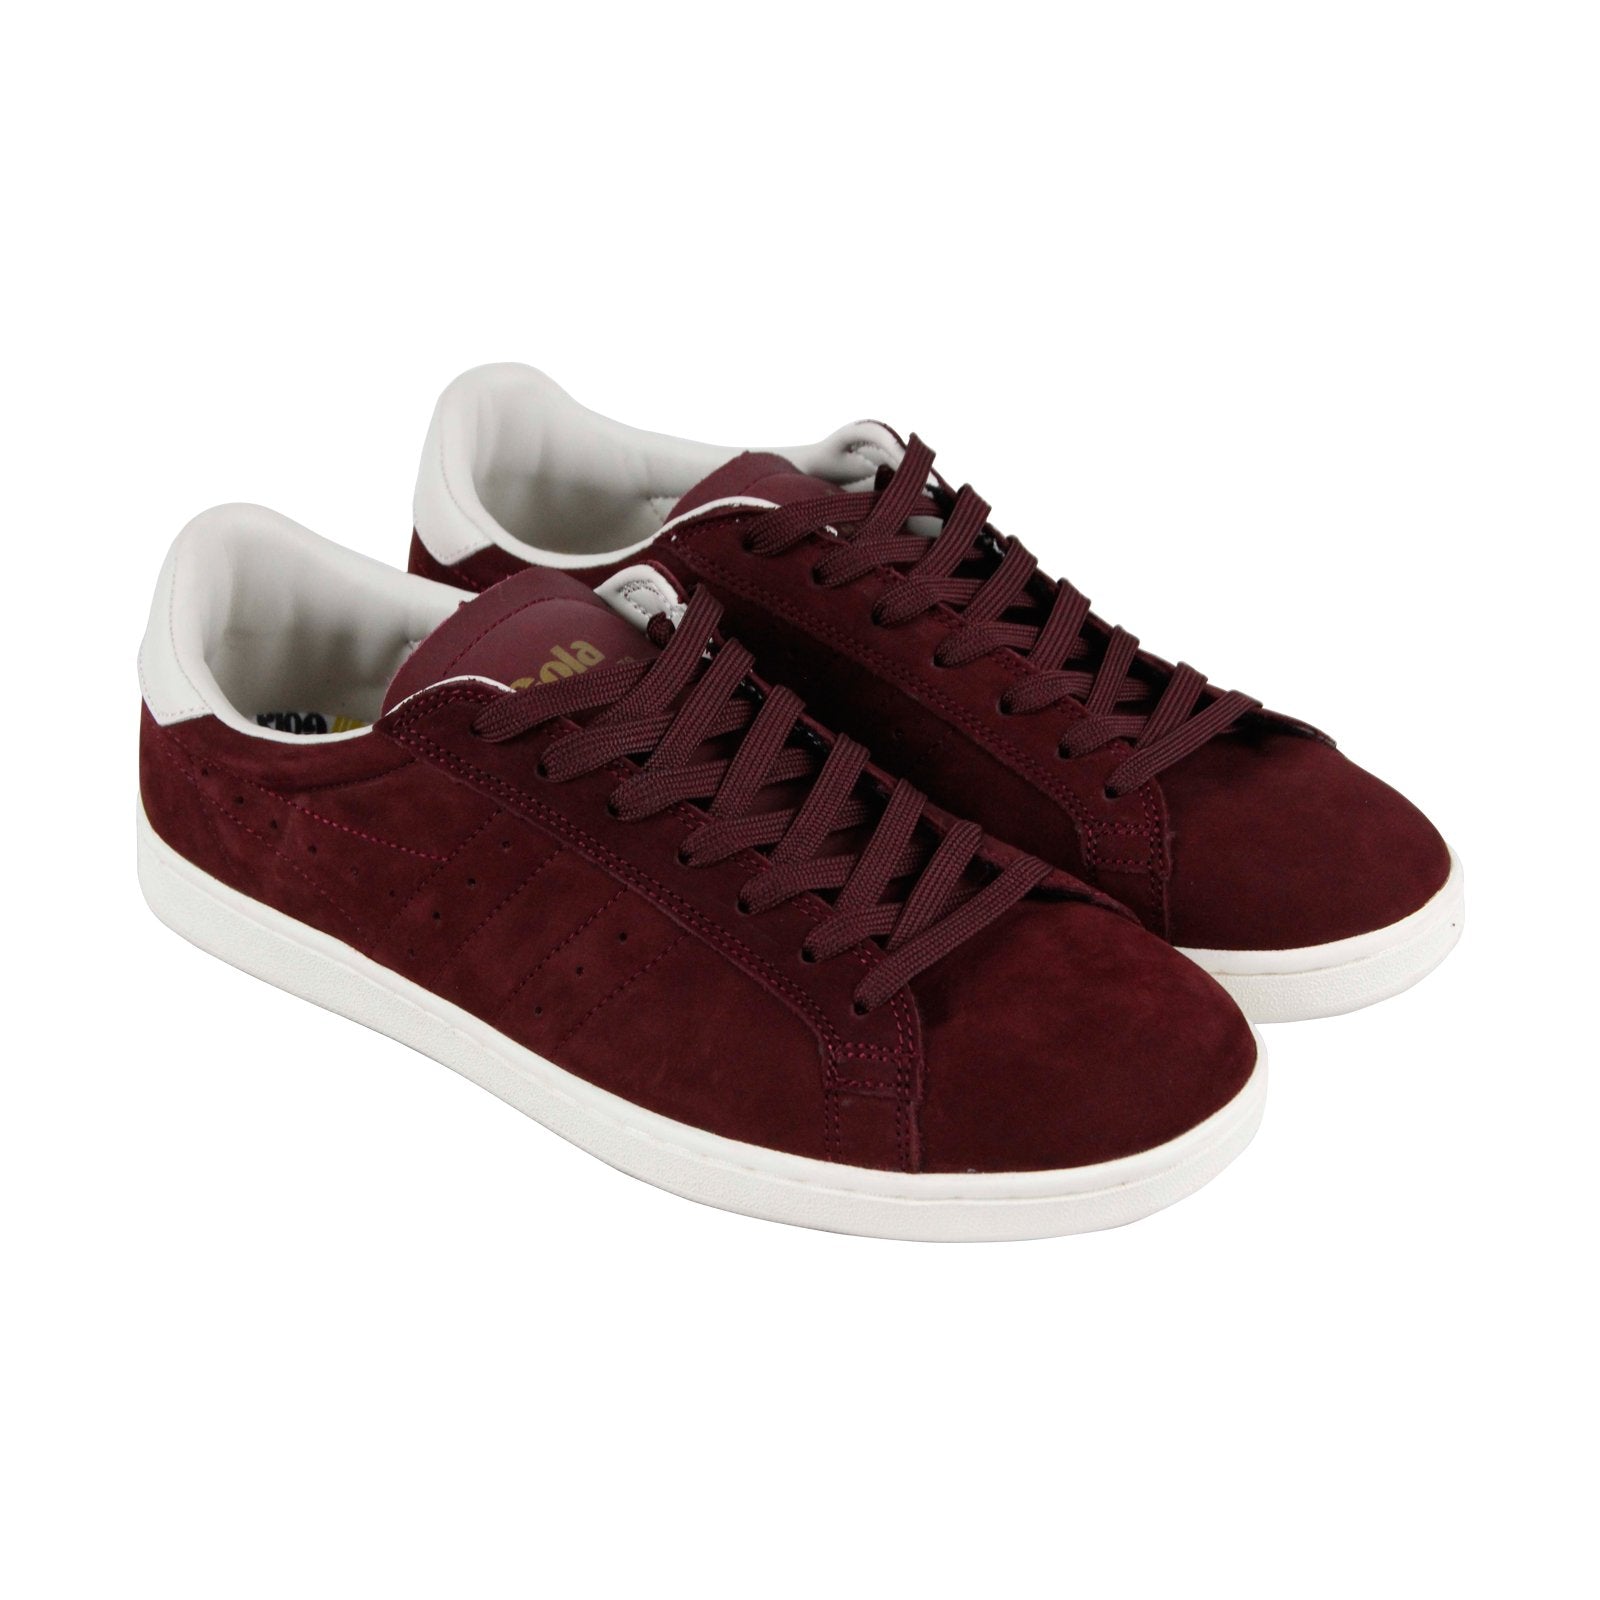 Gola Tennis 79 CMA392 Mens Burgundy Suede Lace Up Lifestyle Sneakers S ...